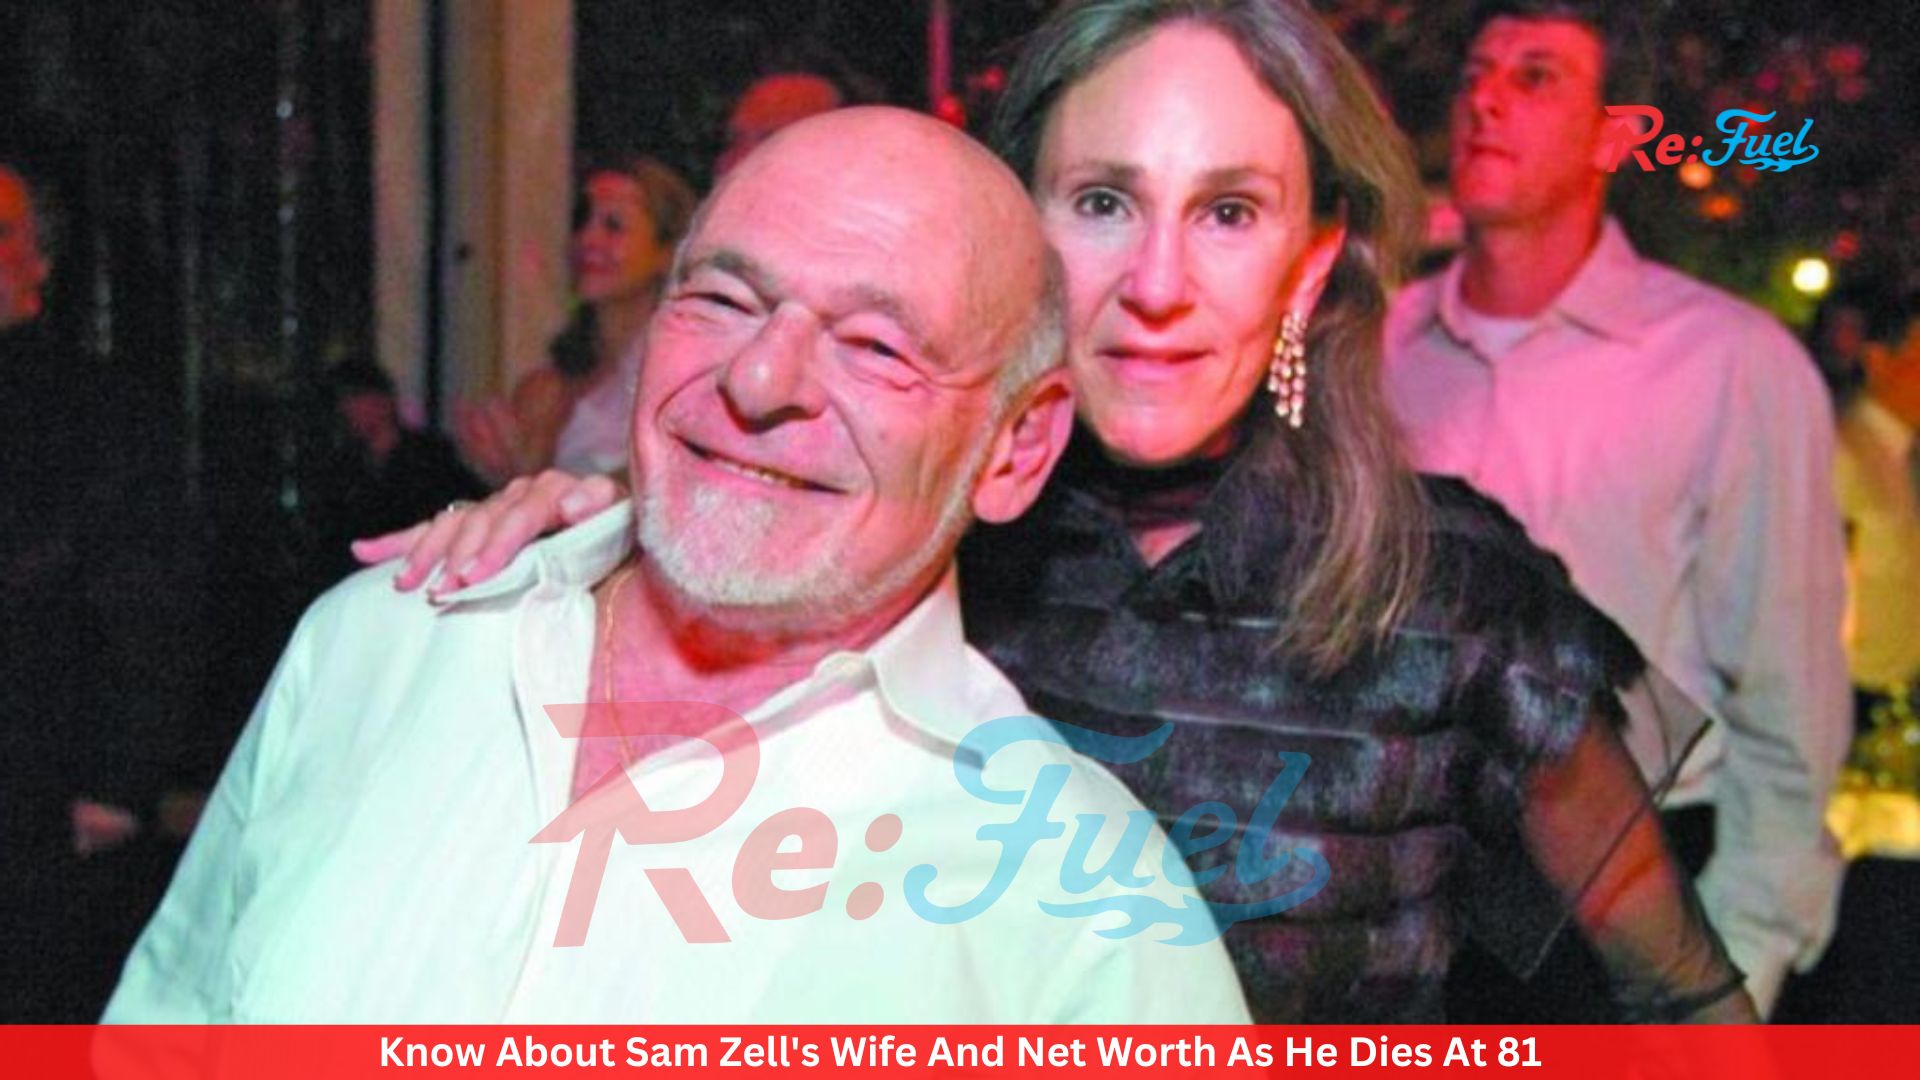 Know About Sam Zell's Wife And Net Worth As He Dies At 81